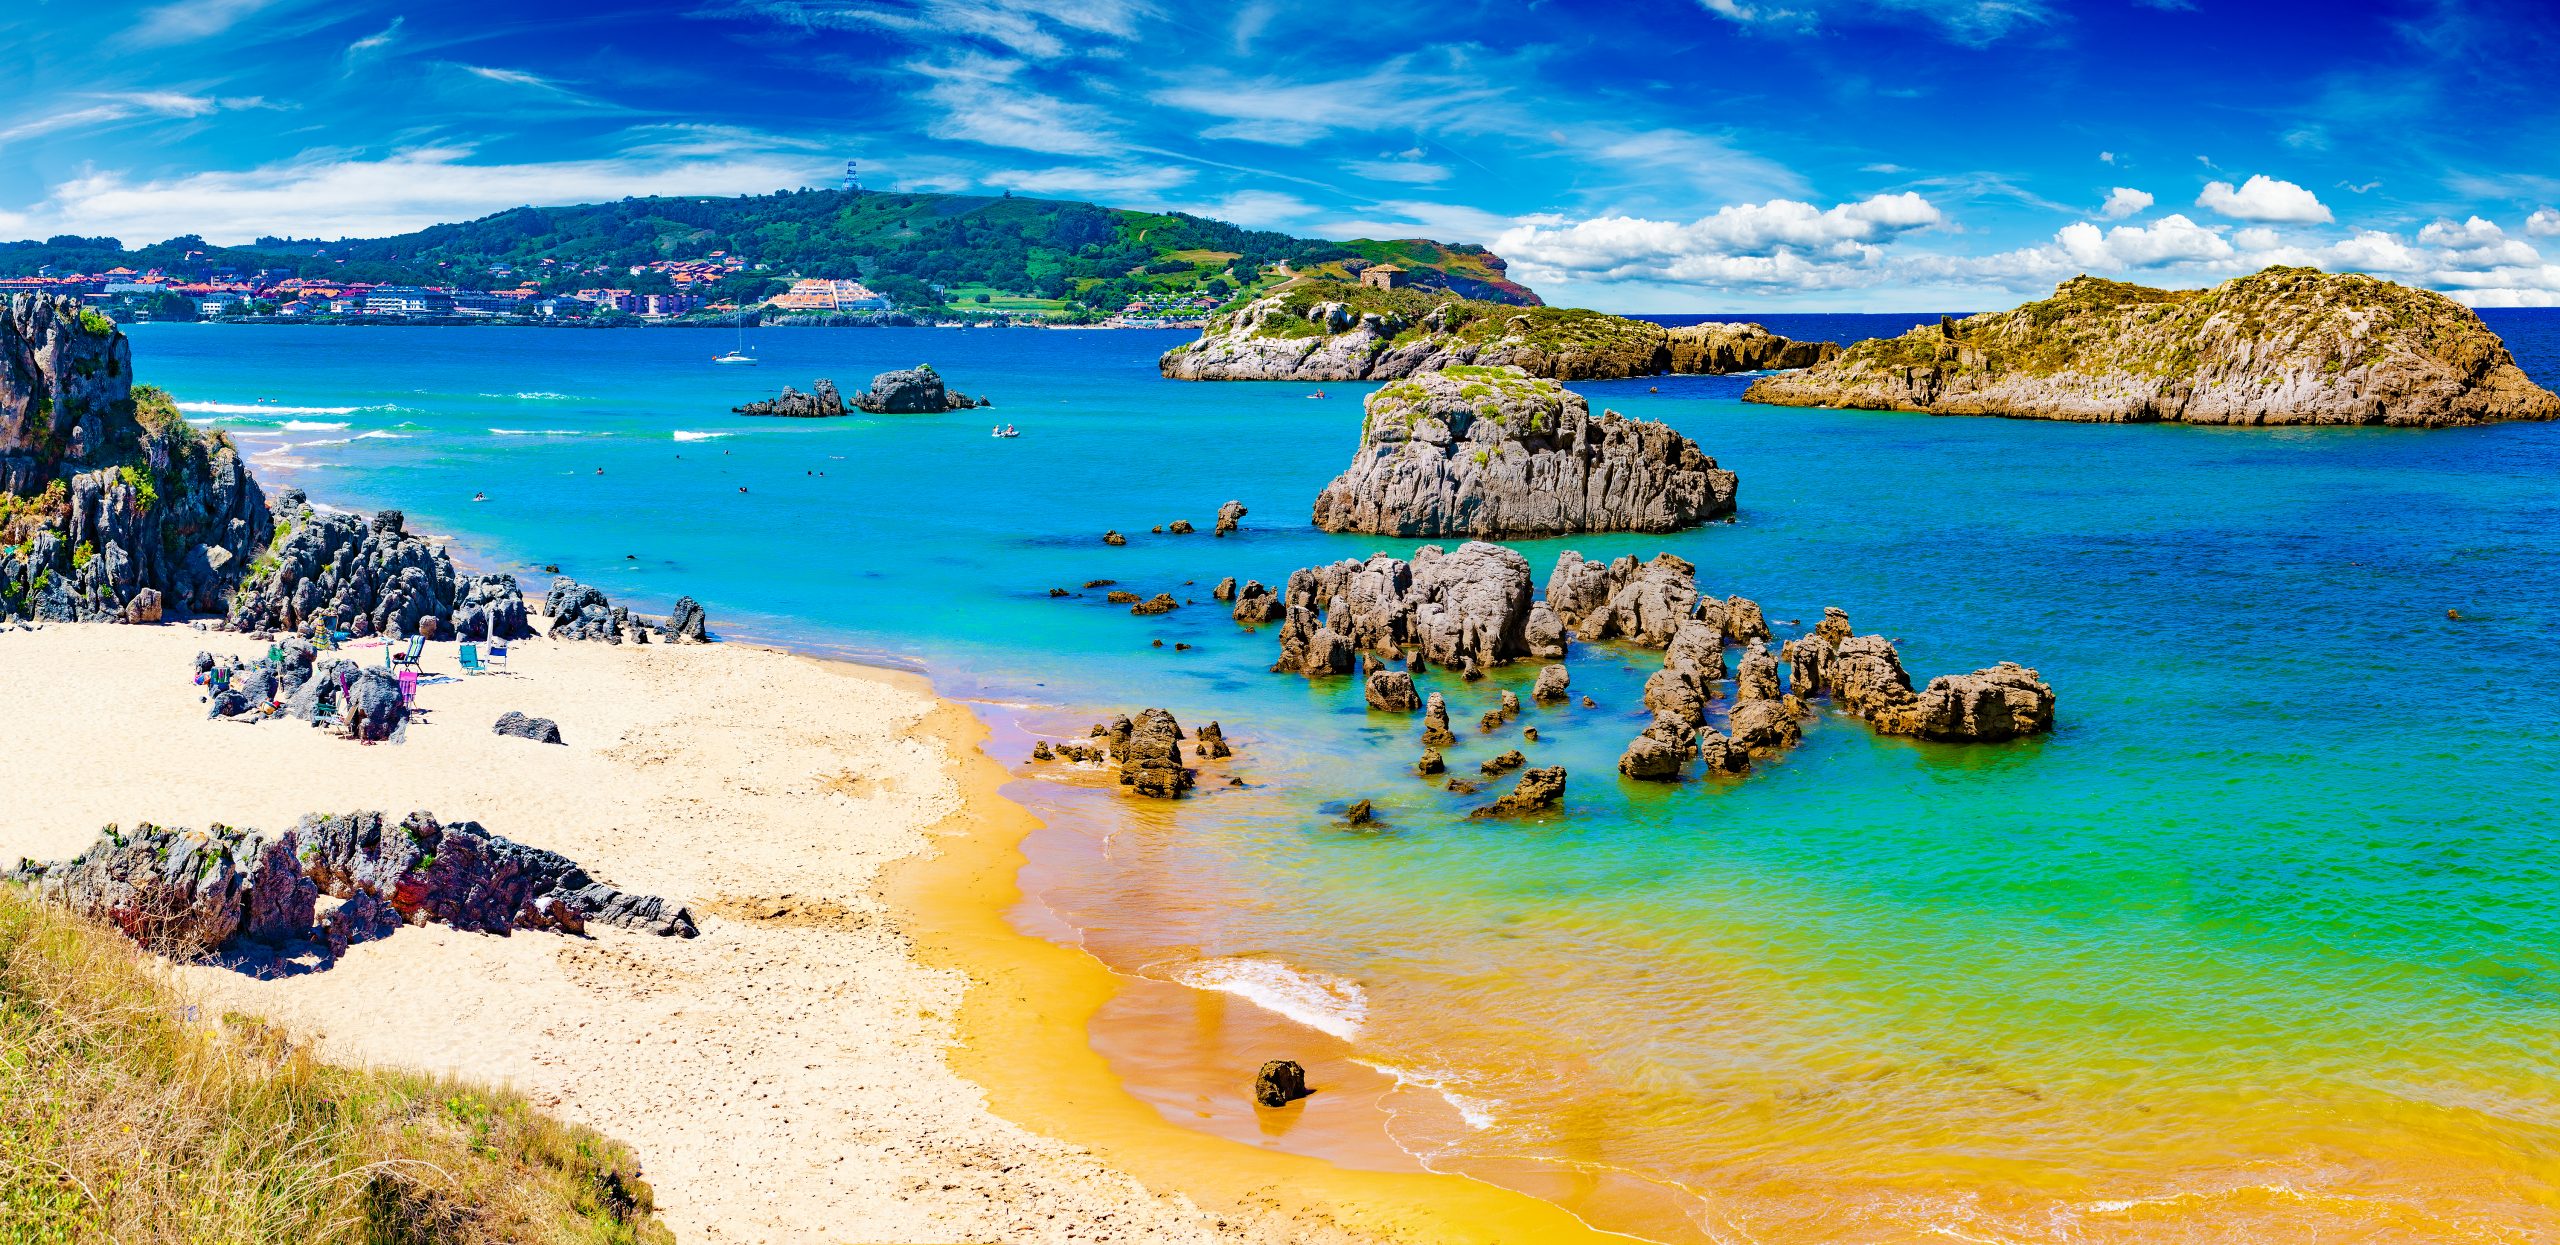 Noja,Beach,In,Cantabria,spain.scenic,Coasts,And,Coastal,Towns,In,Northern